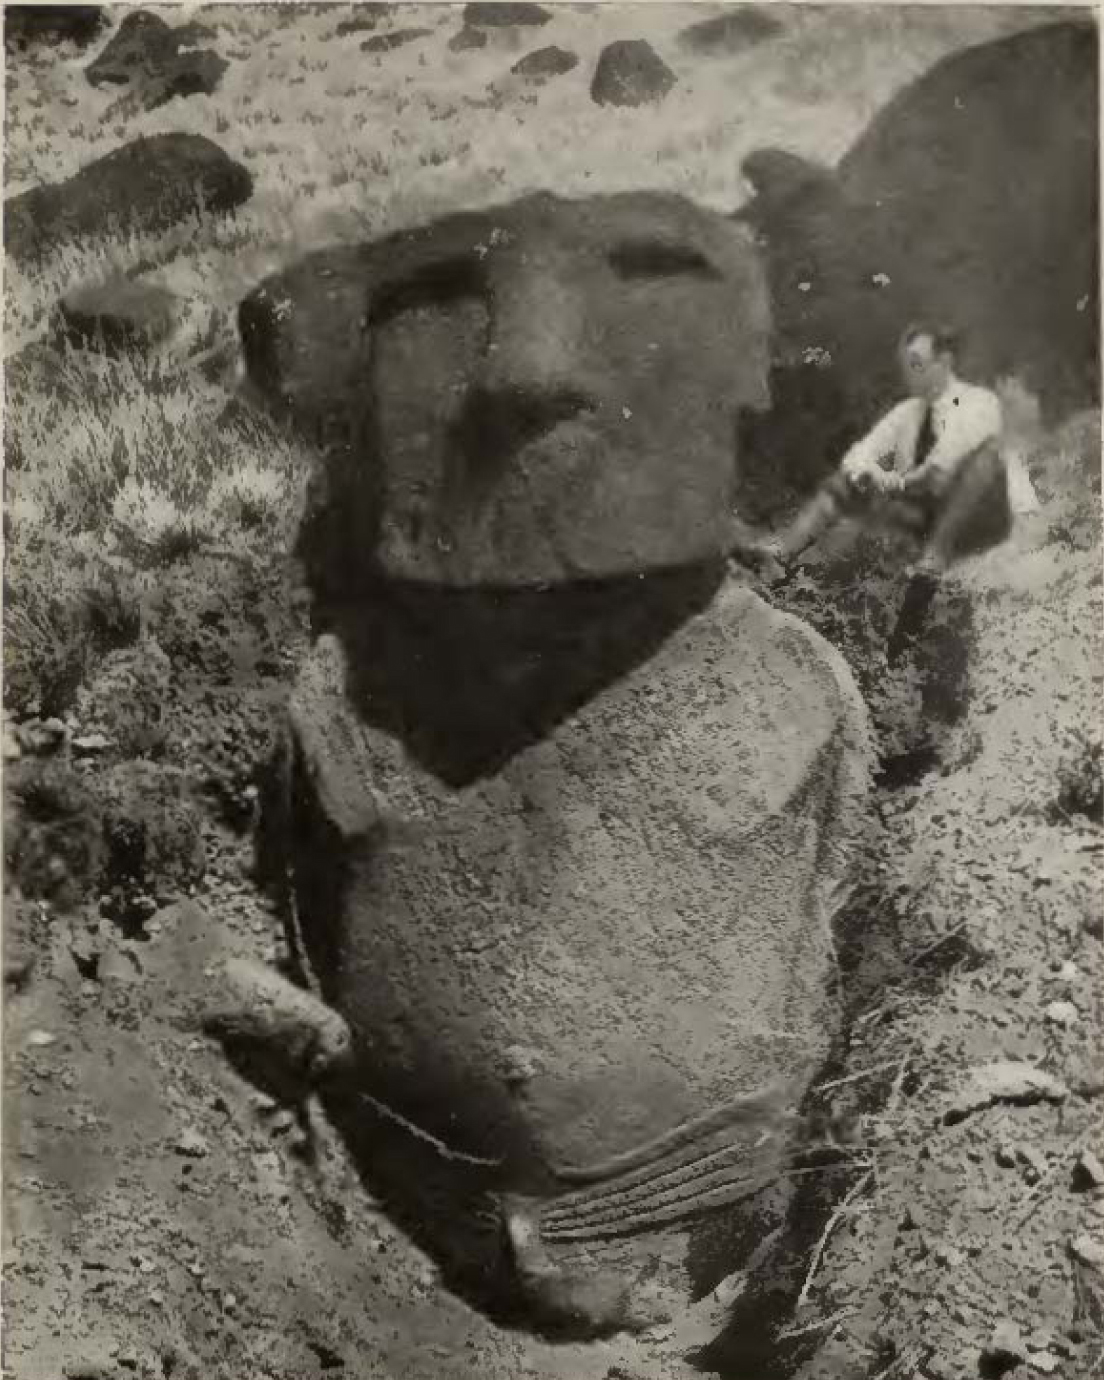 man sitting next to large stone statue in the ground